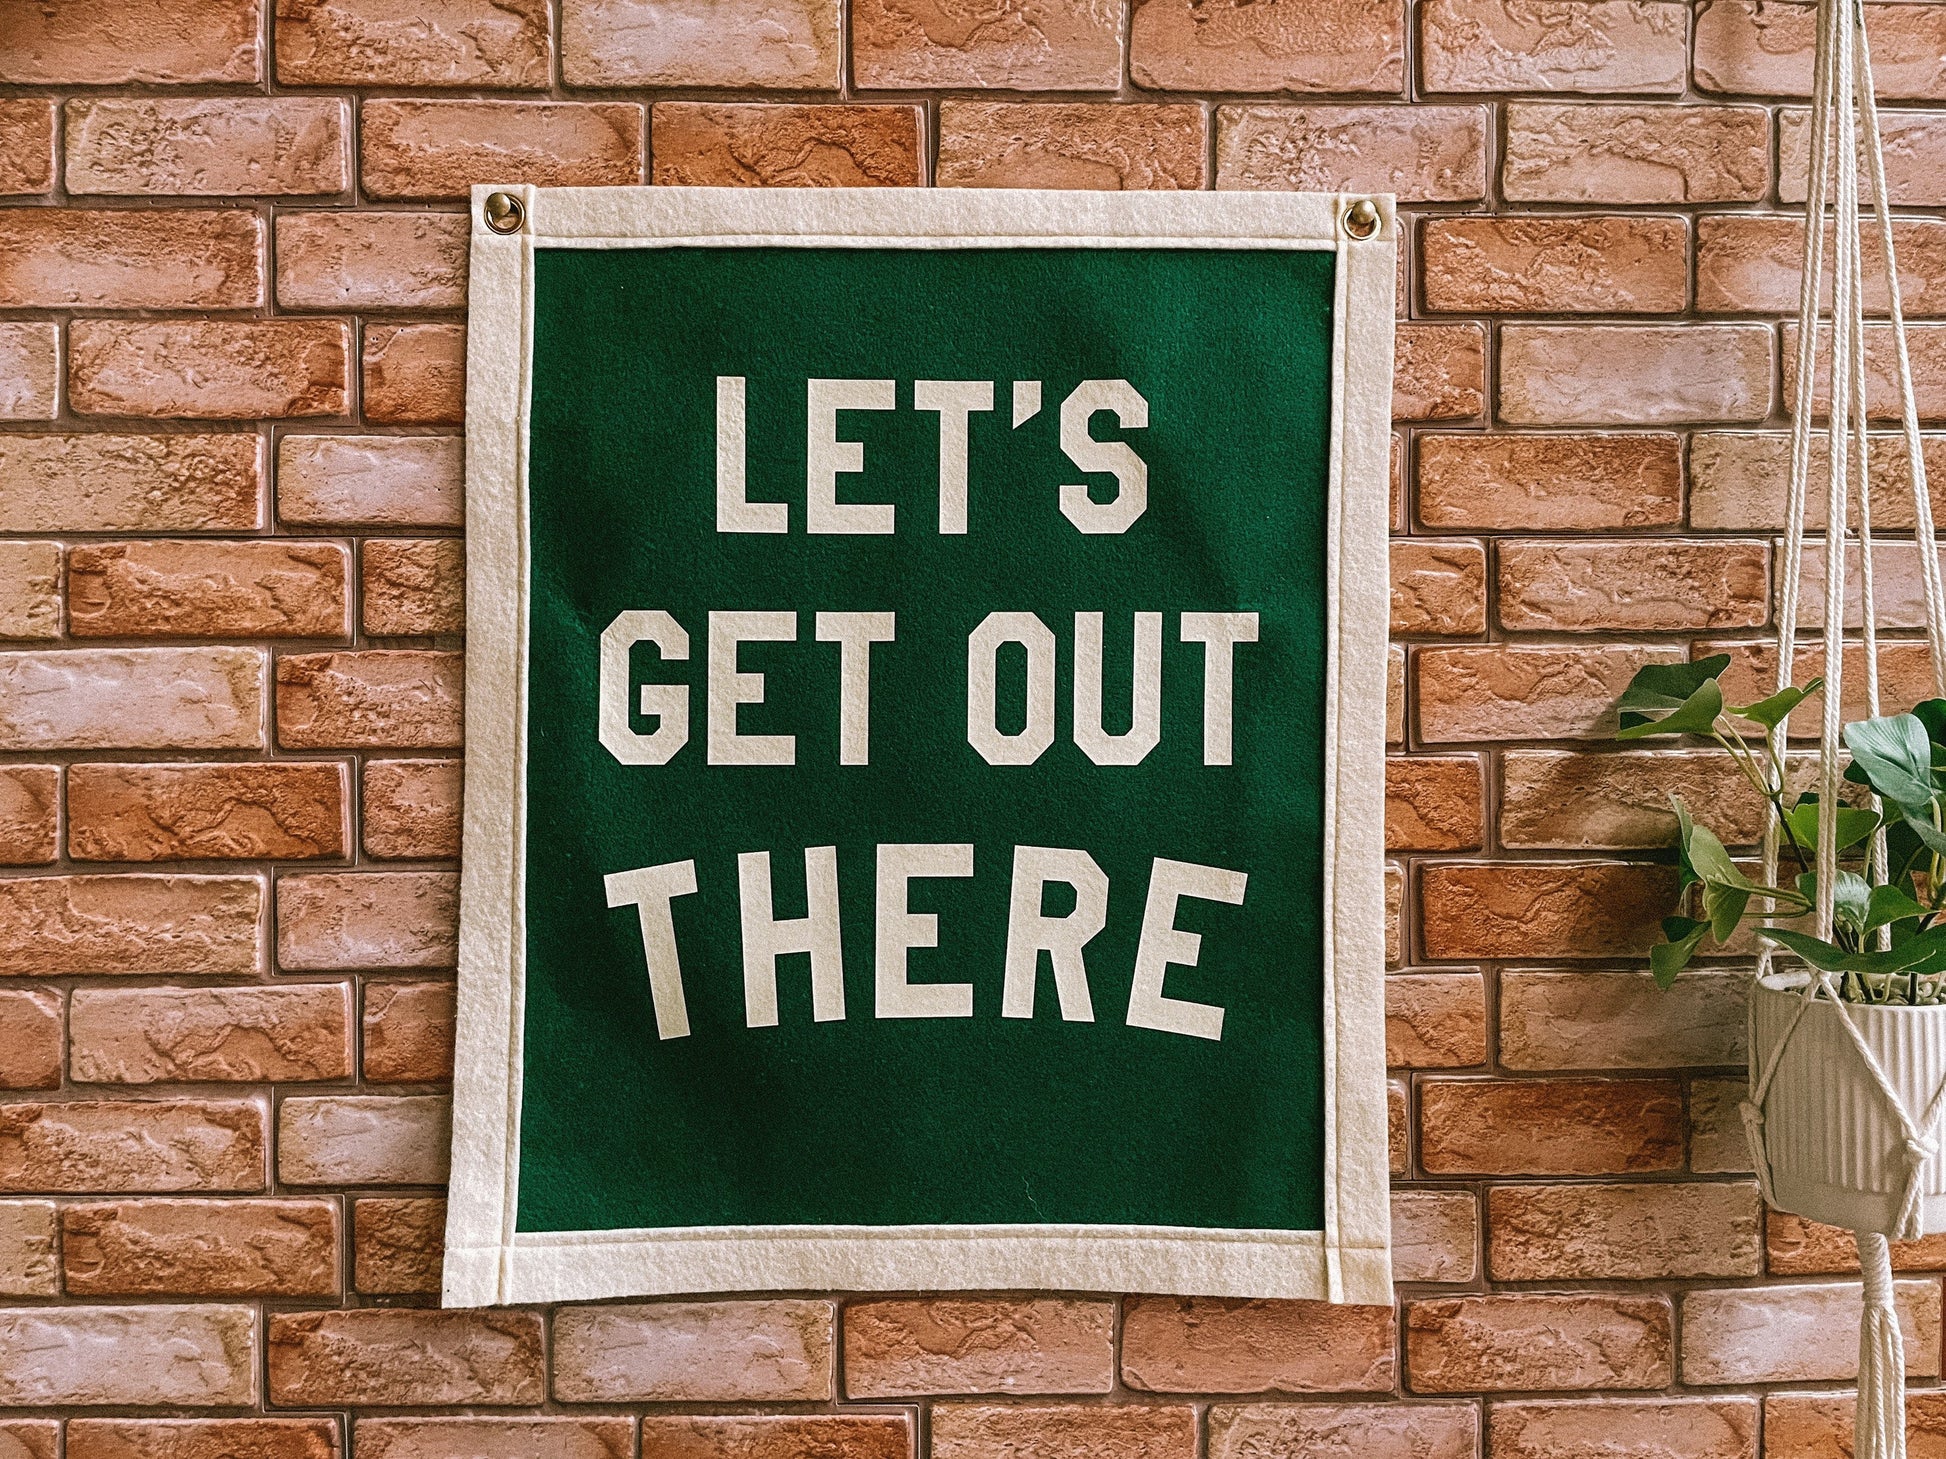 Lets get out there | Travel Felt Pennant Flag Banner | Vintage Banner | Wall Decor | Wall Hanging